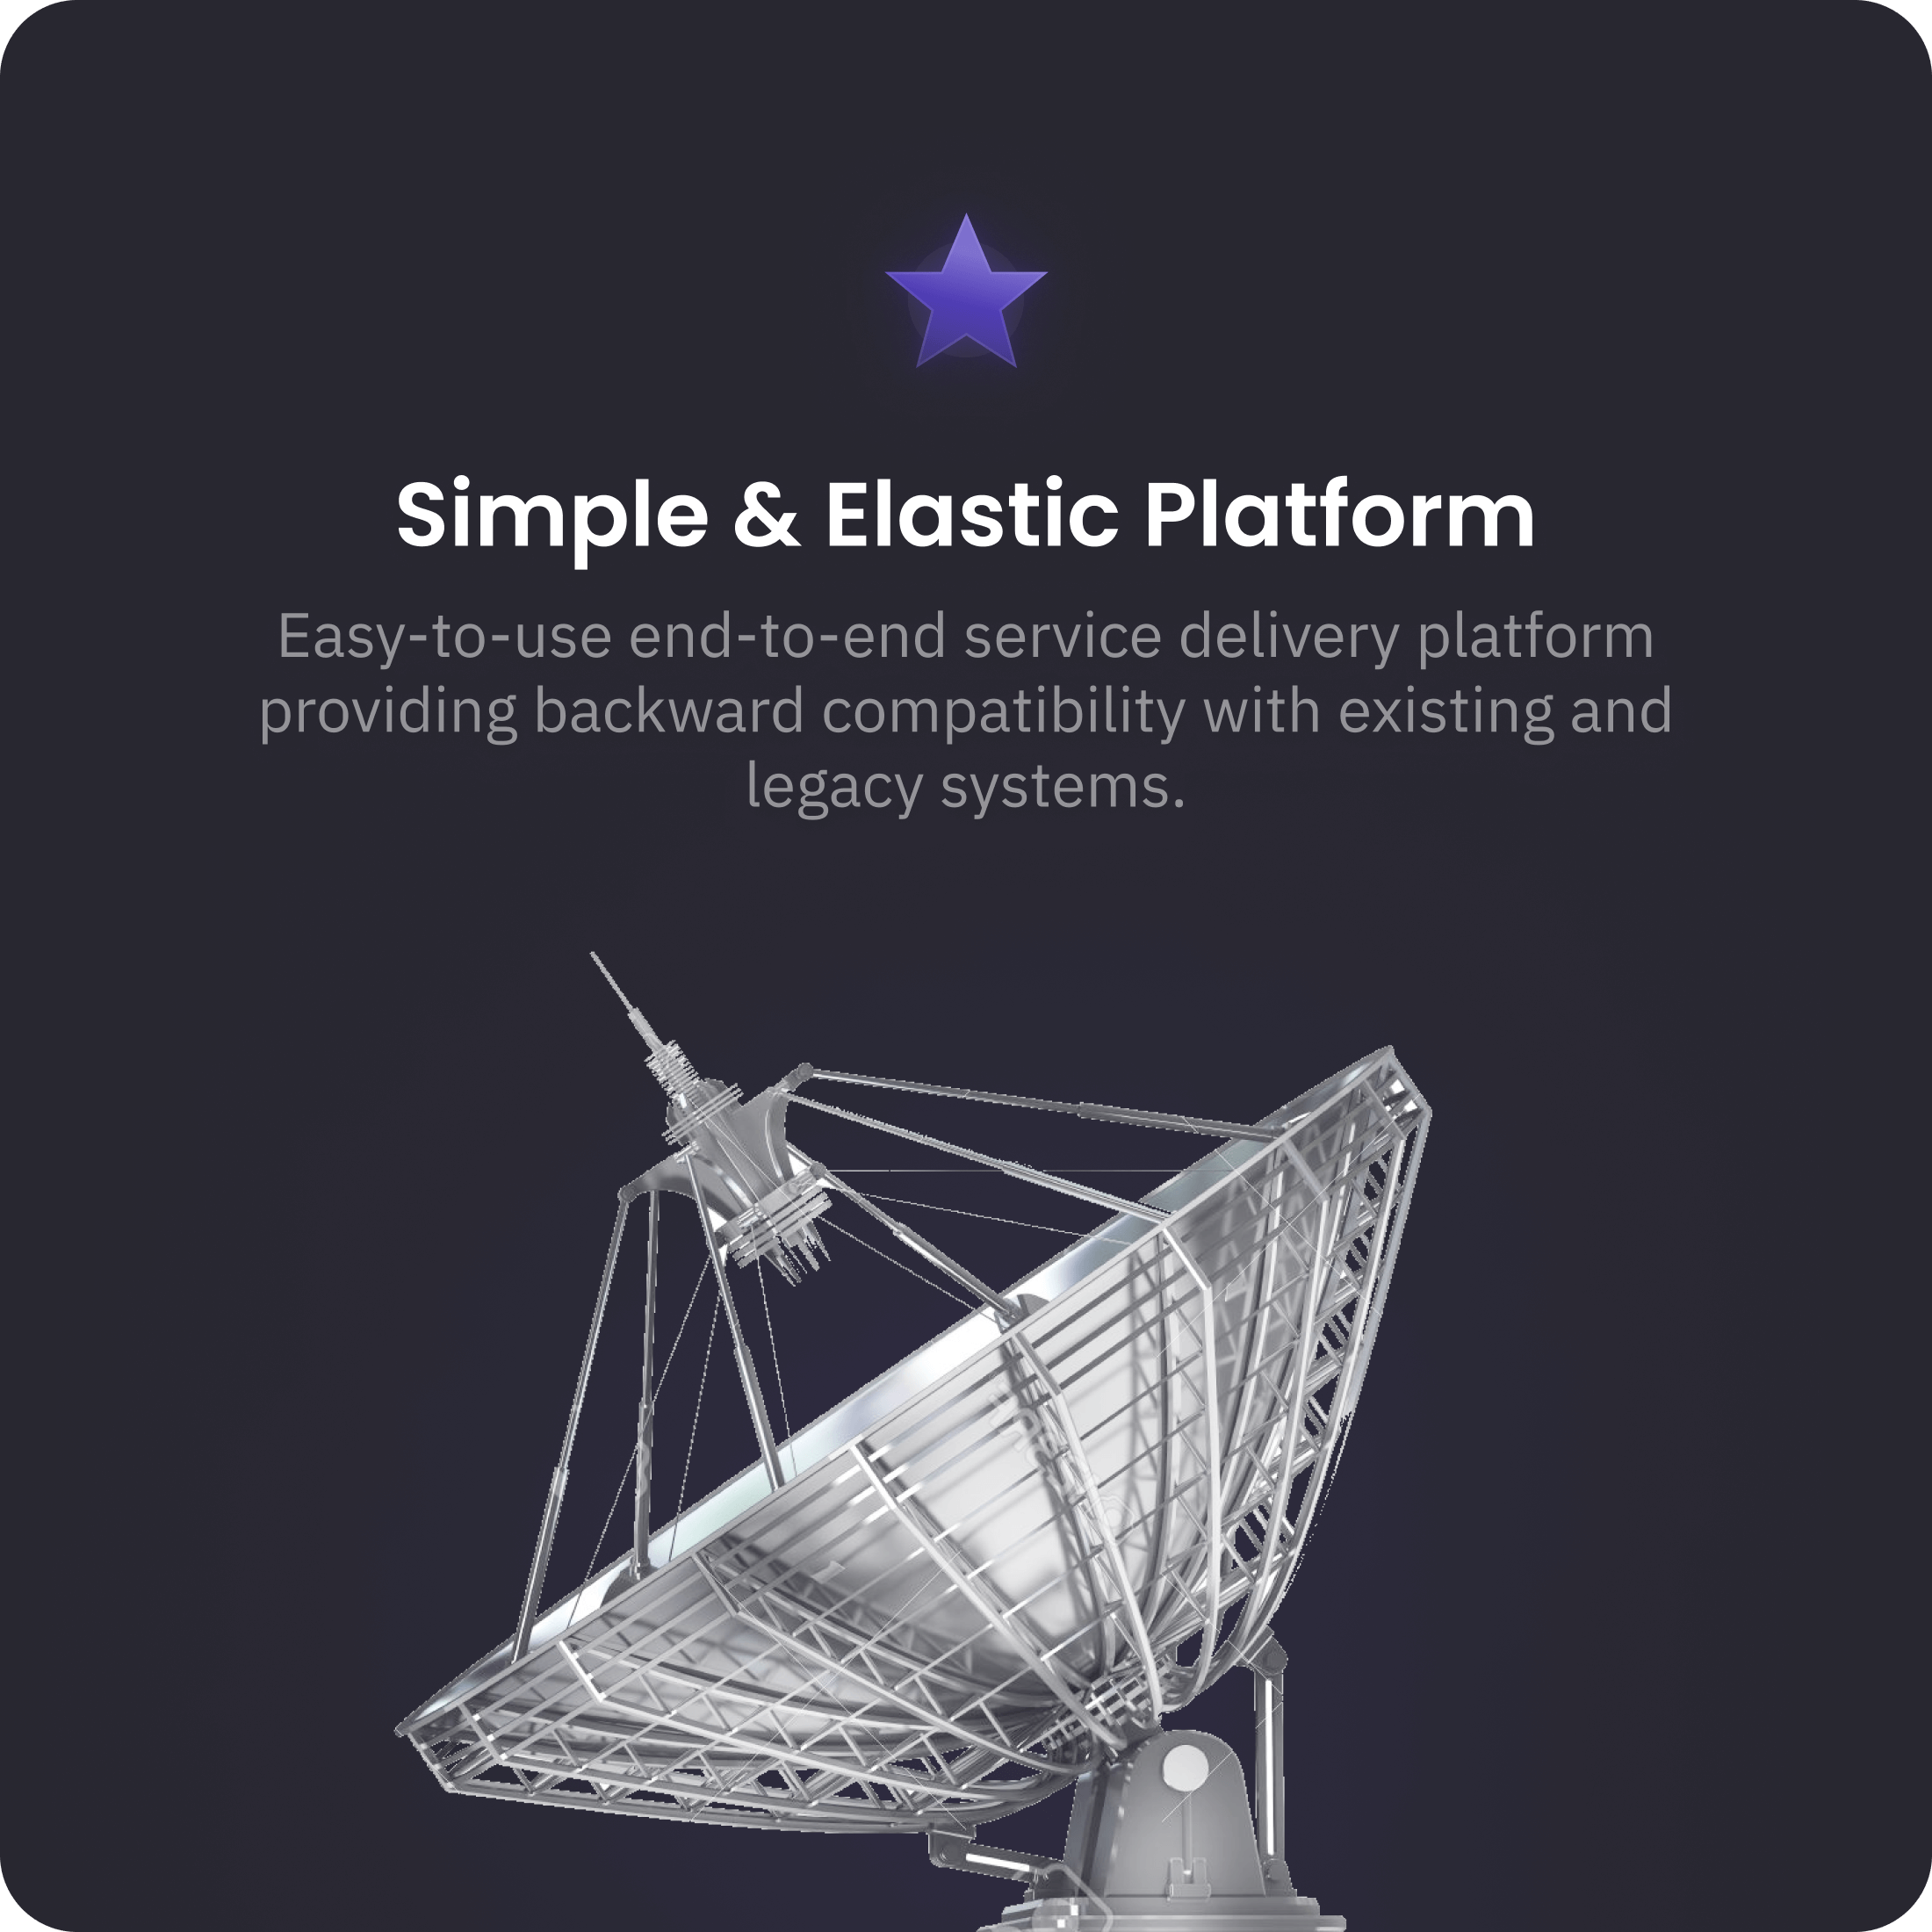 Simple and elastic platform - Easy to use and end to end service delivery platform providing backward compatibility with existing and legacy systems.